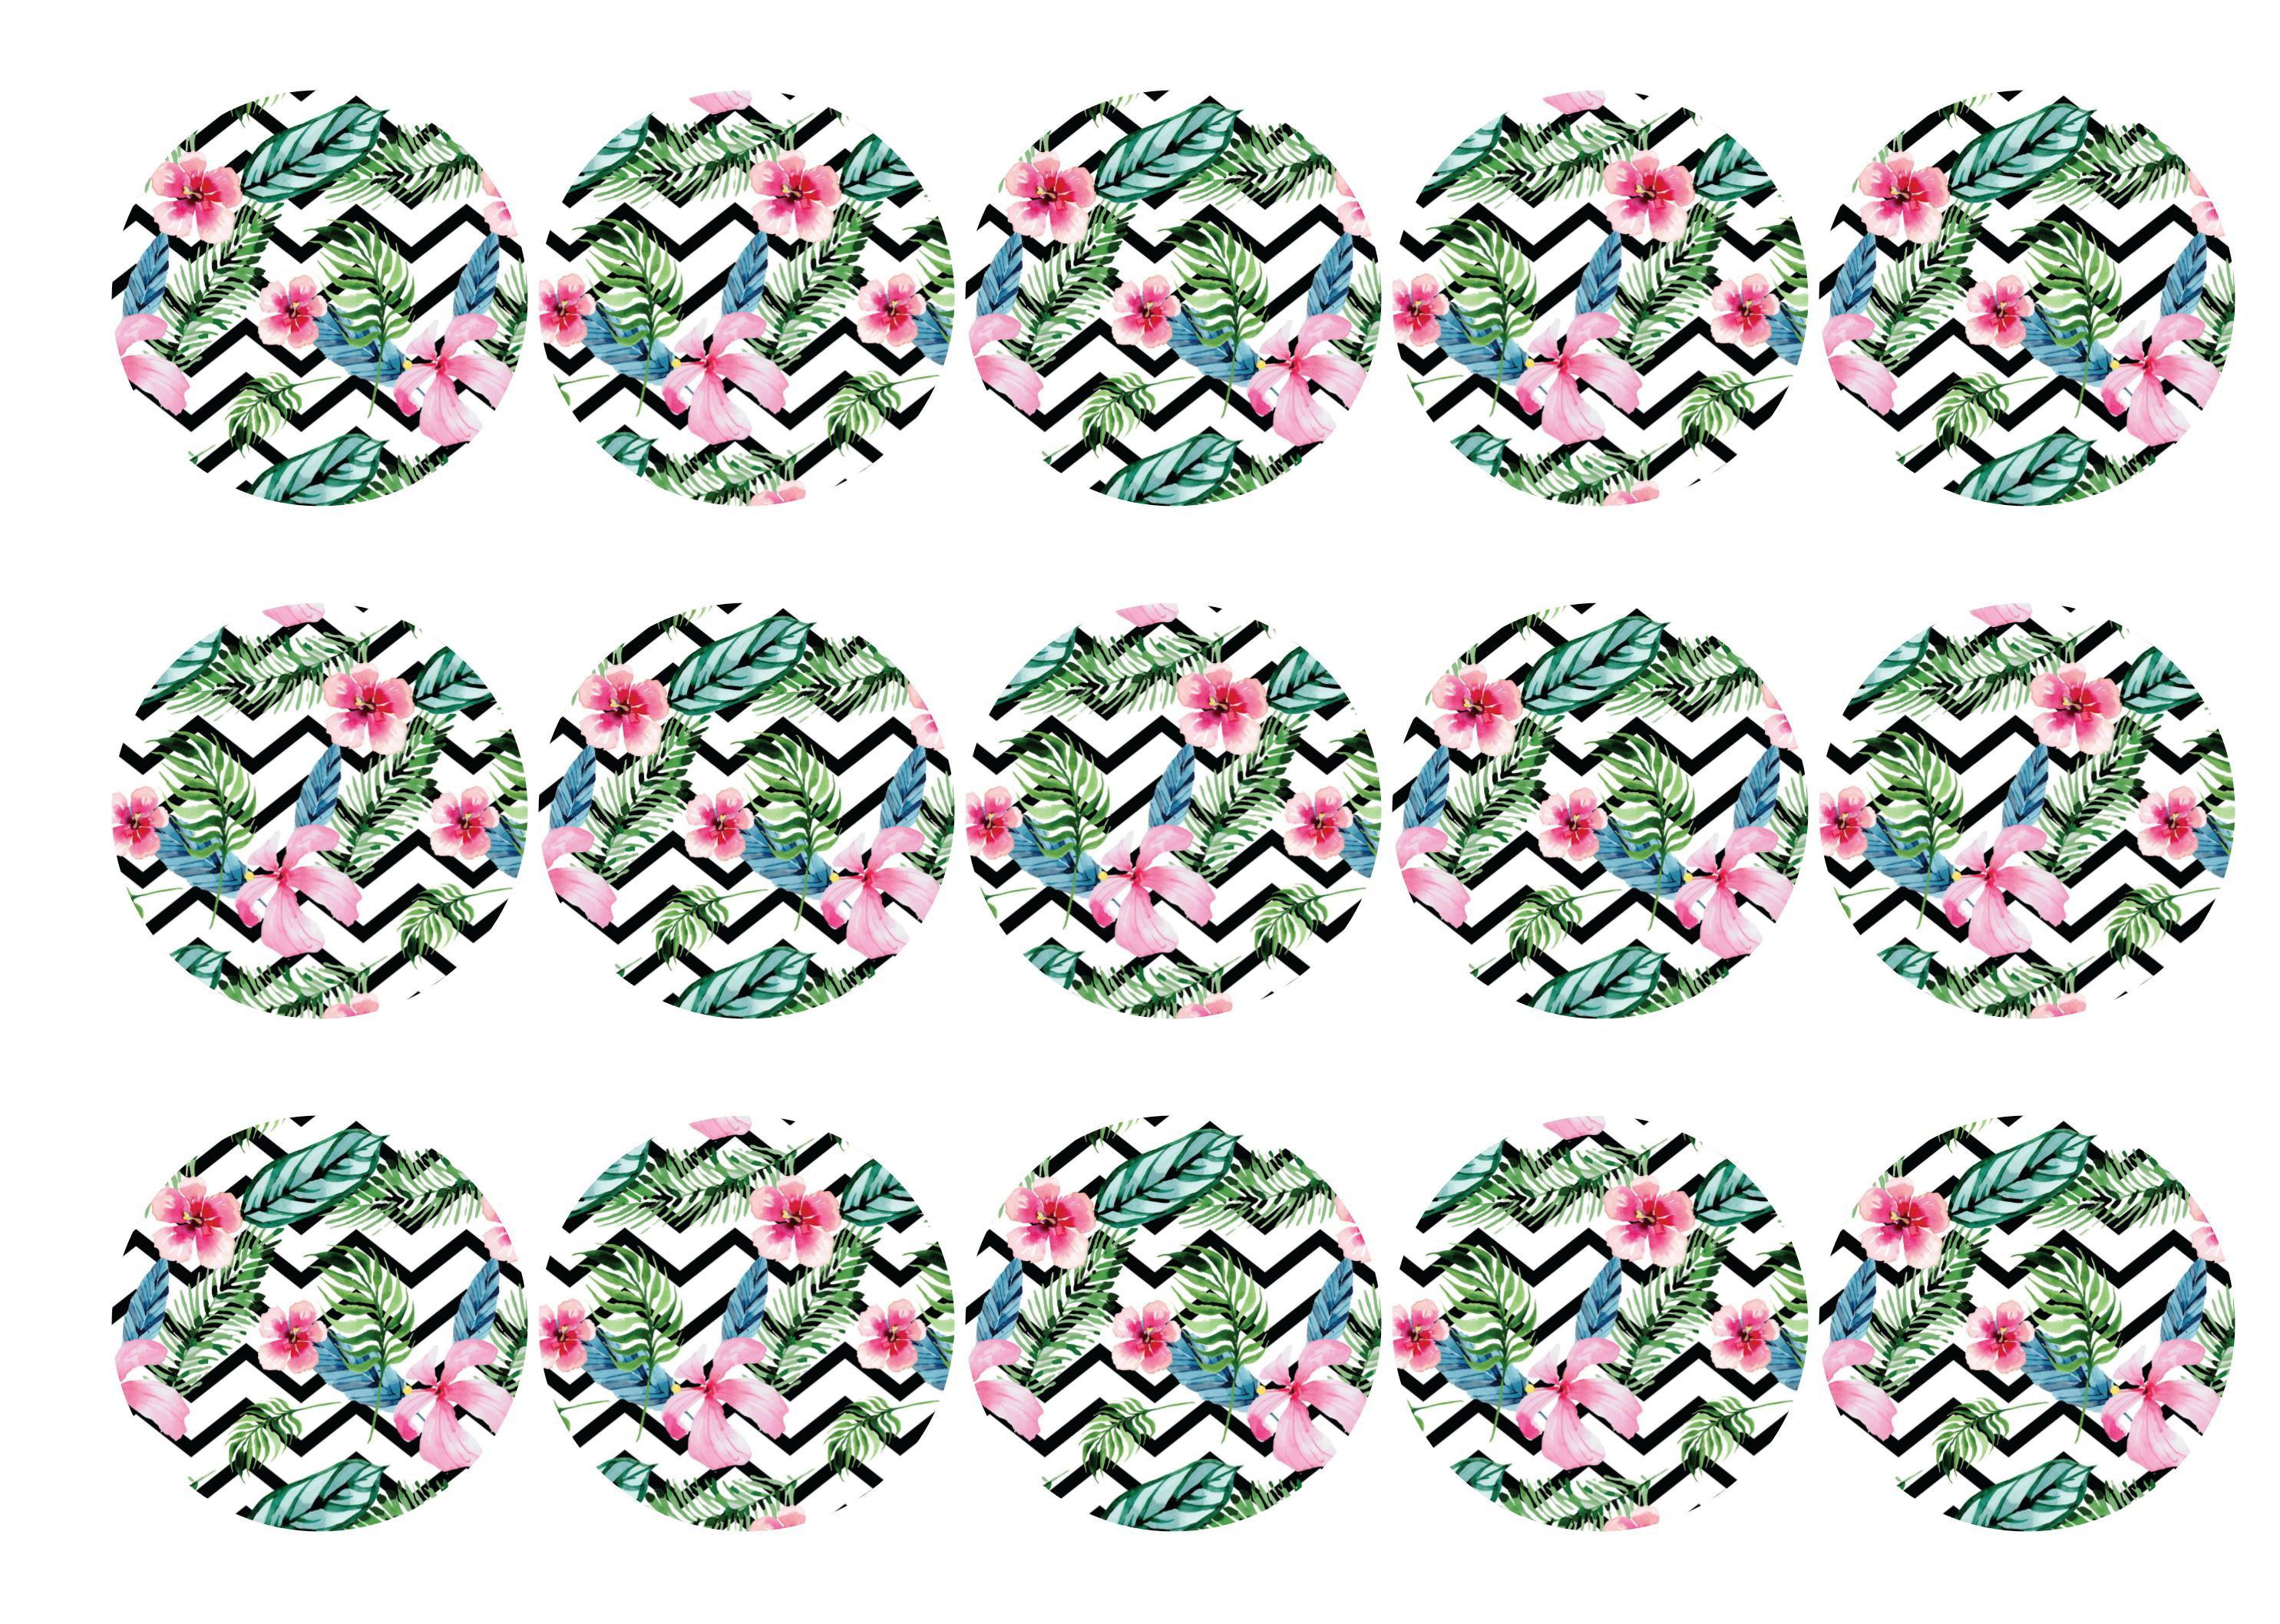 15 printed cupcake toppers with a tropical chevron pattern